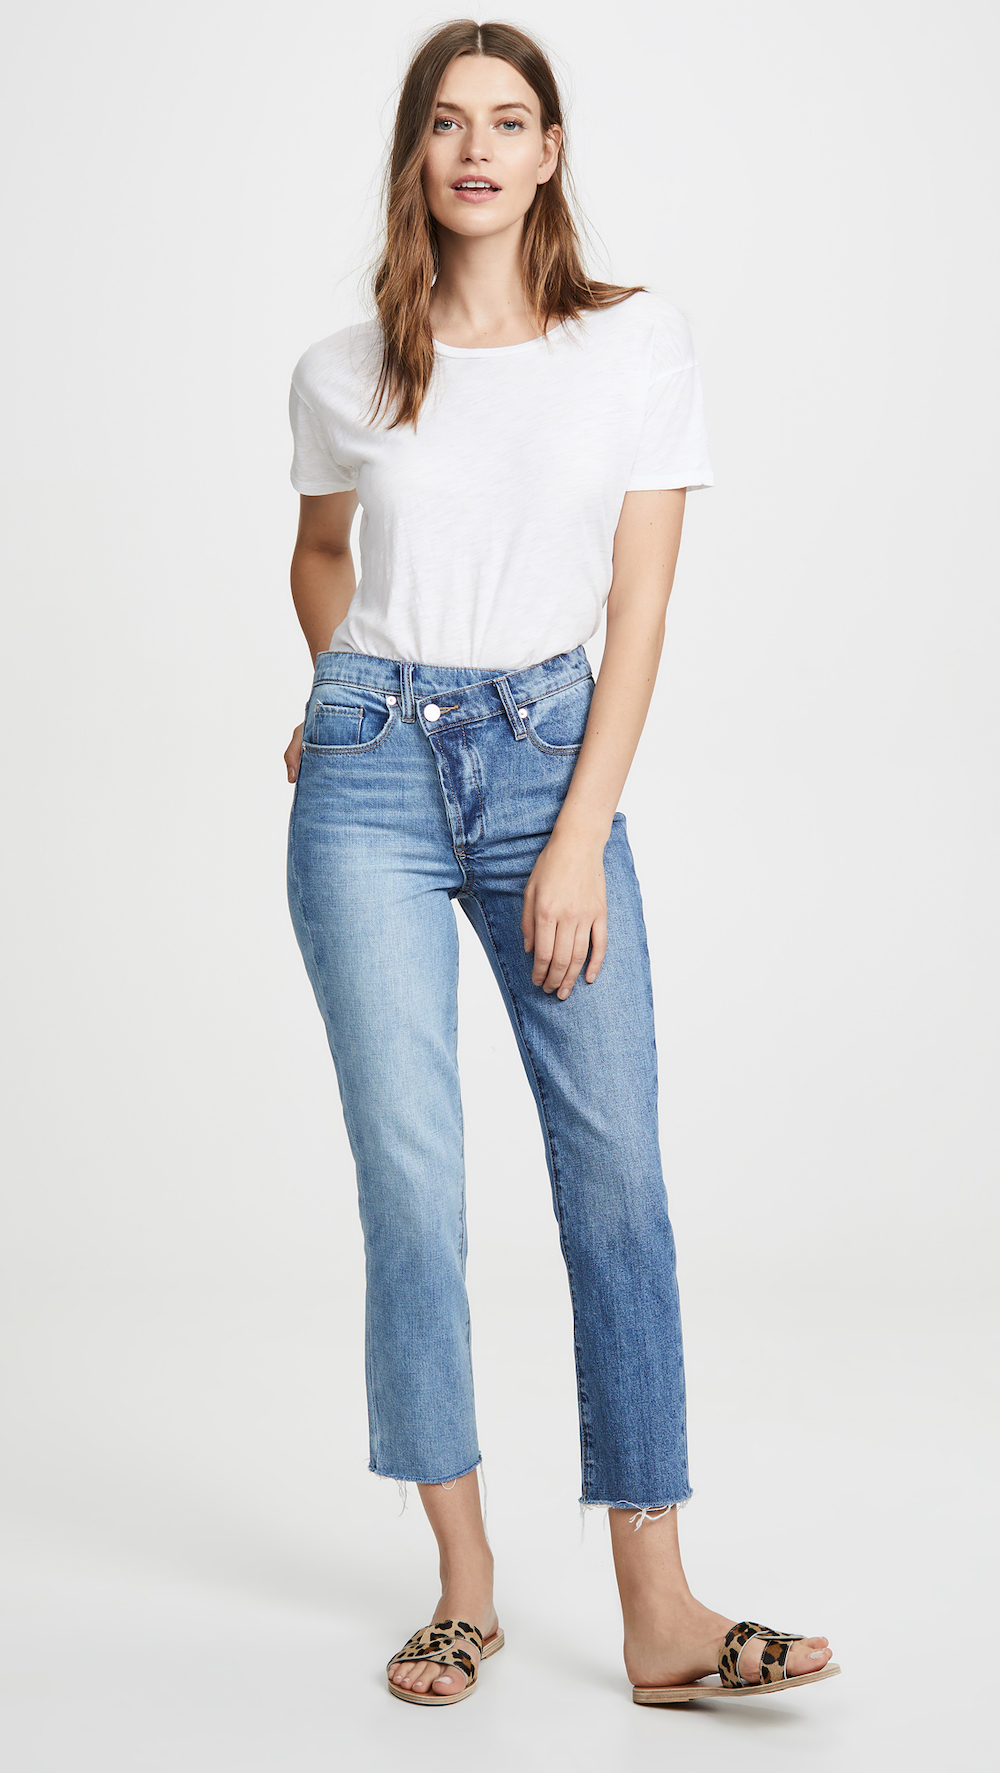 14 Pairs of Nonbasic Blue Jeans You Need for Fall - theFashionSpot